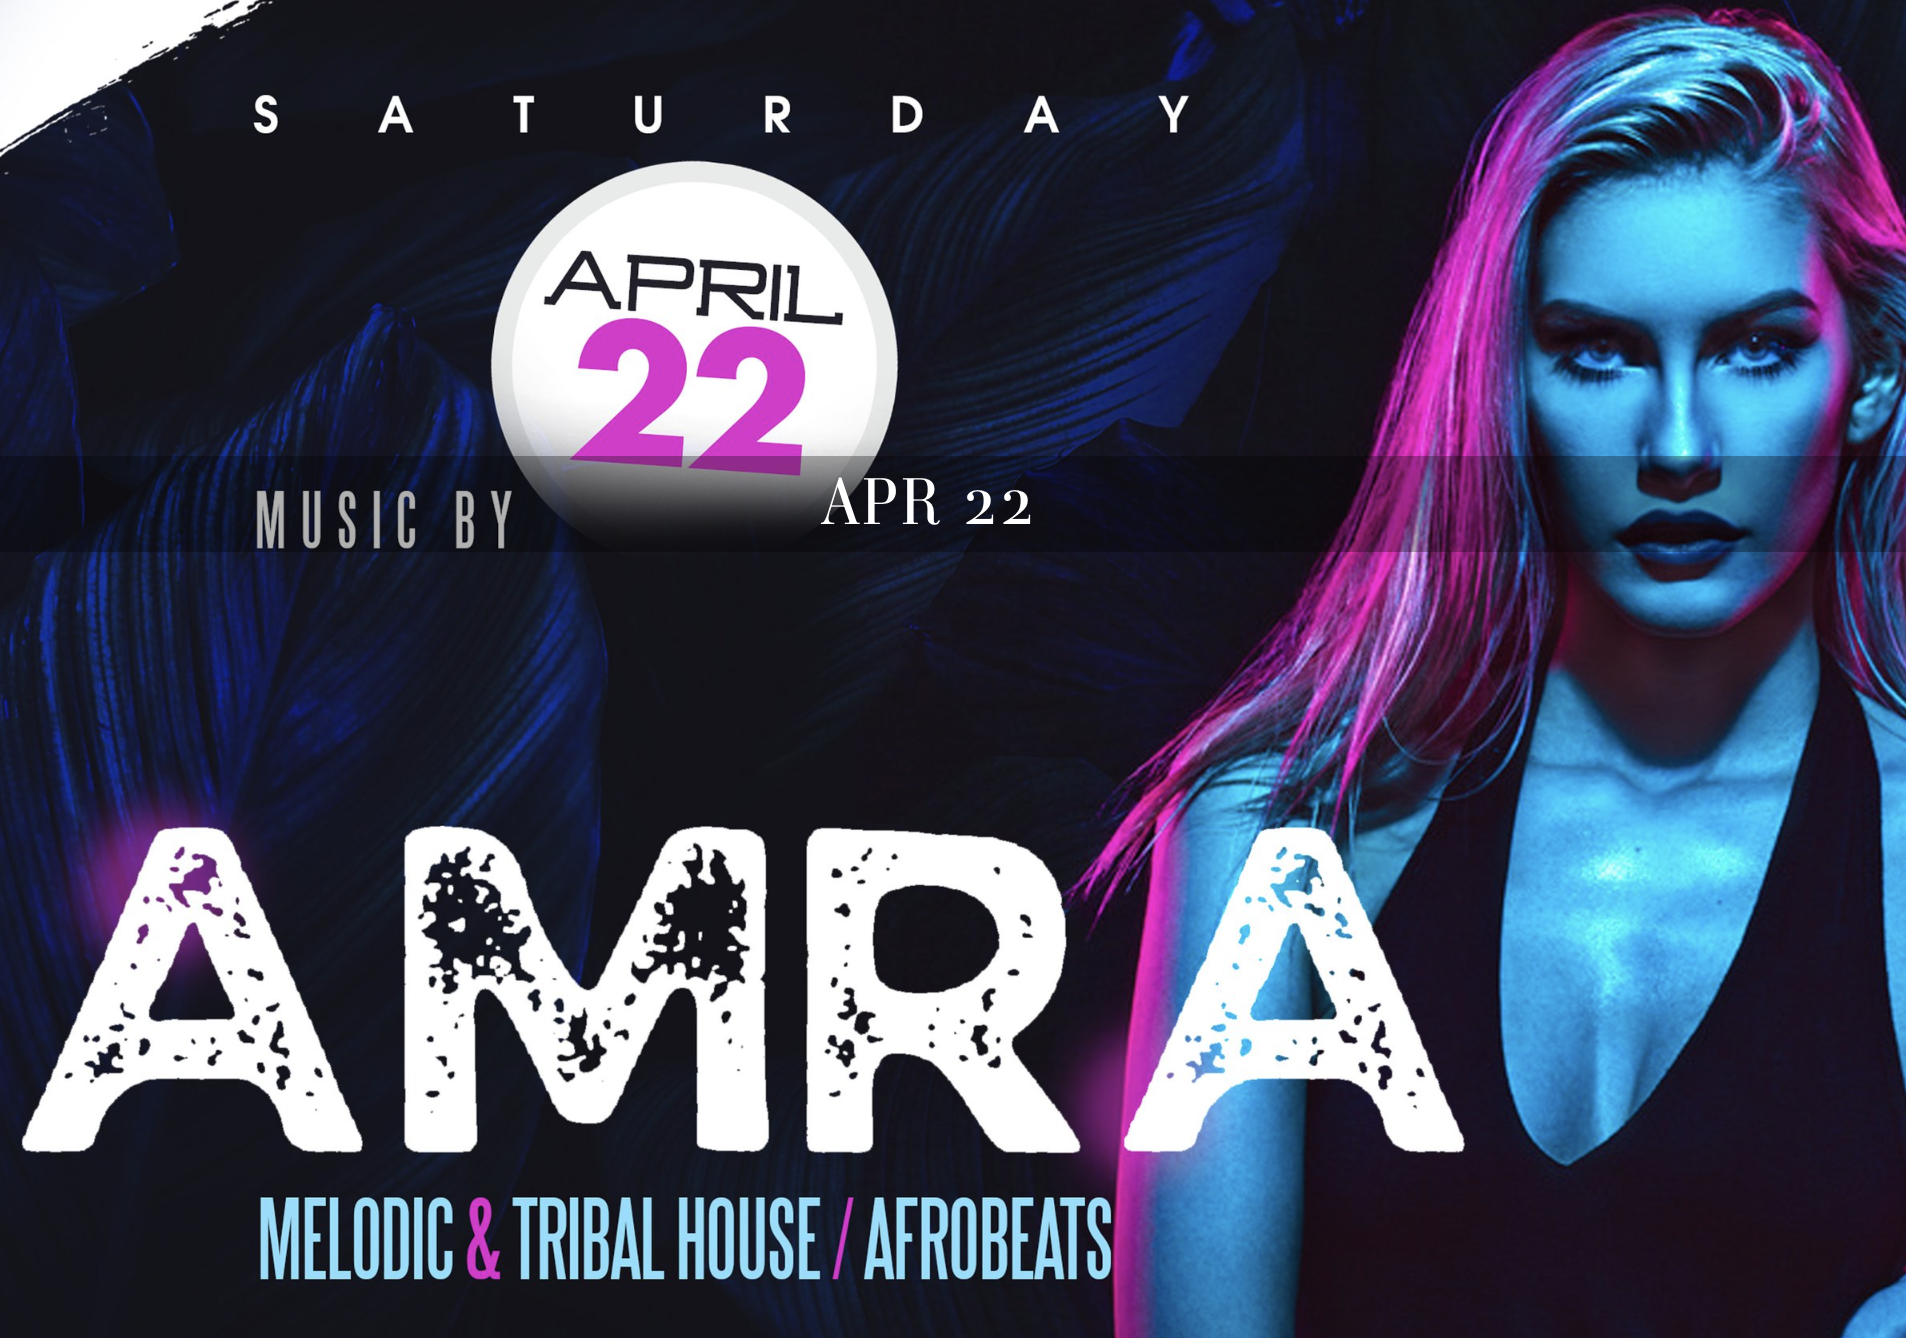 Melodic & Tribal House/Afrobeats at WHINO